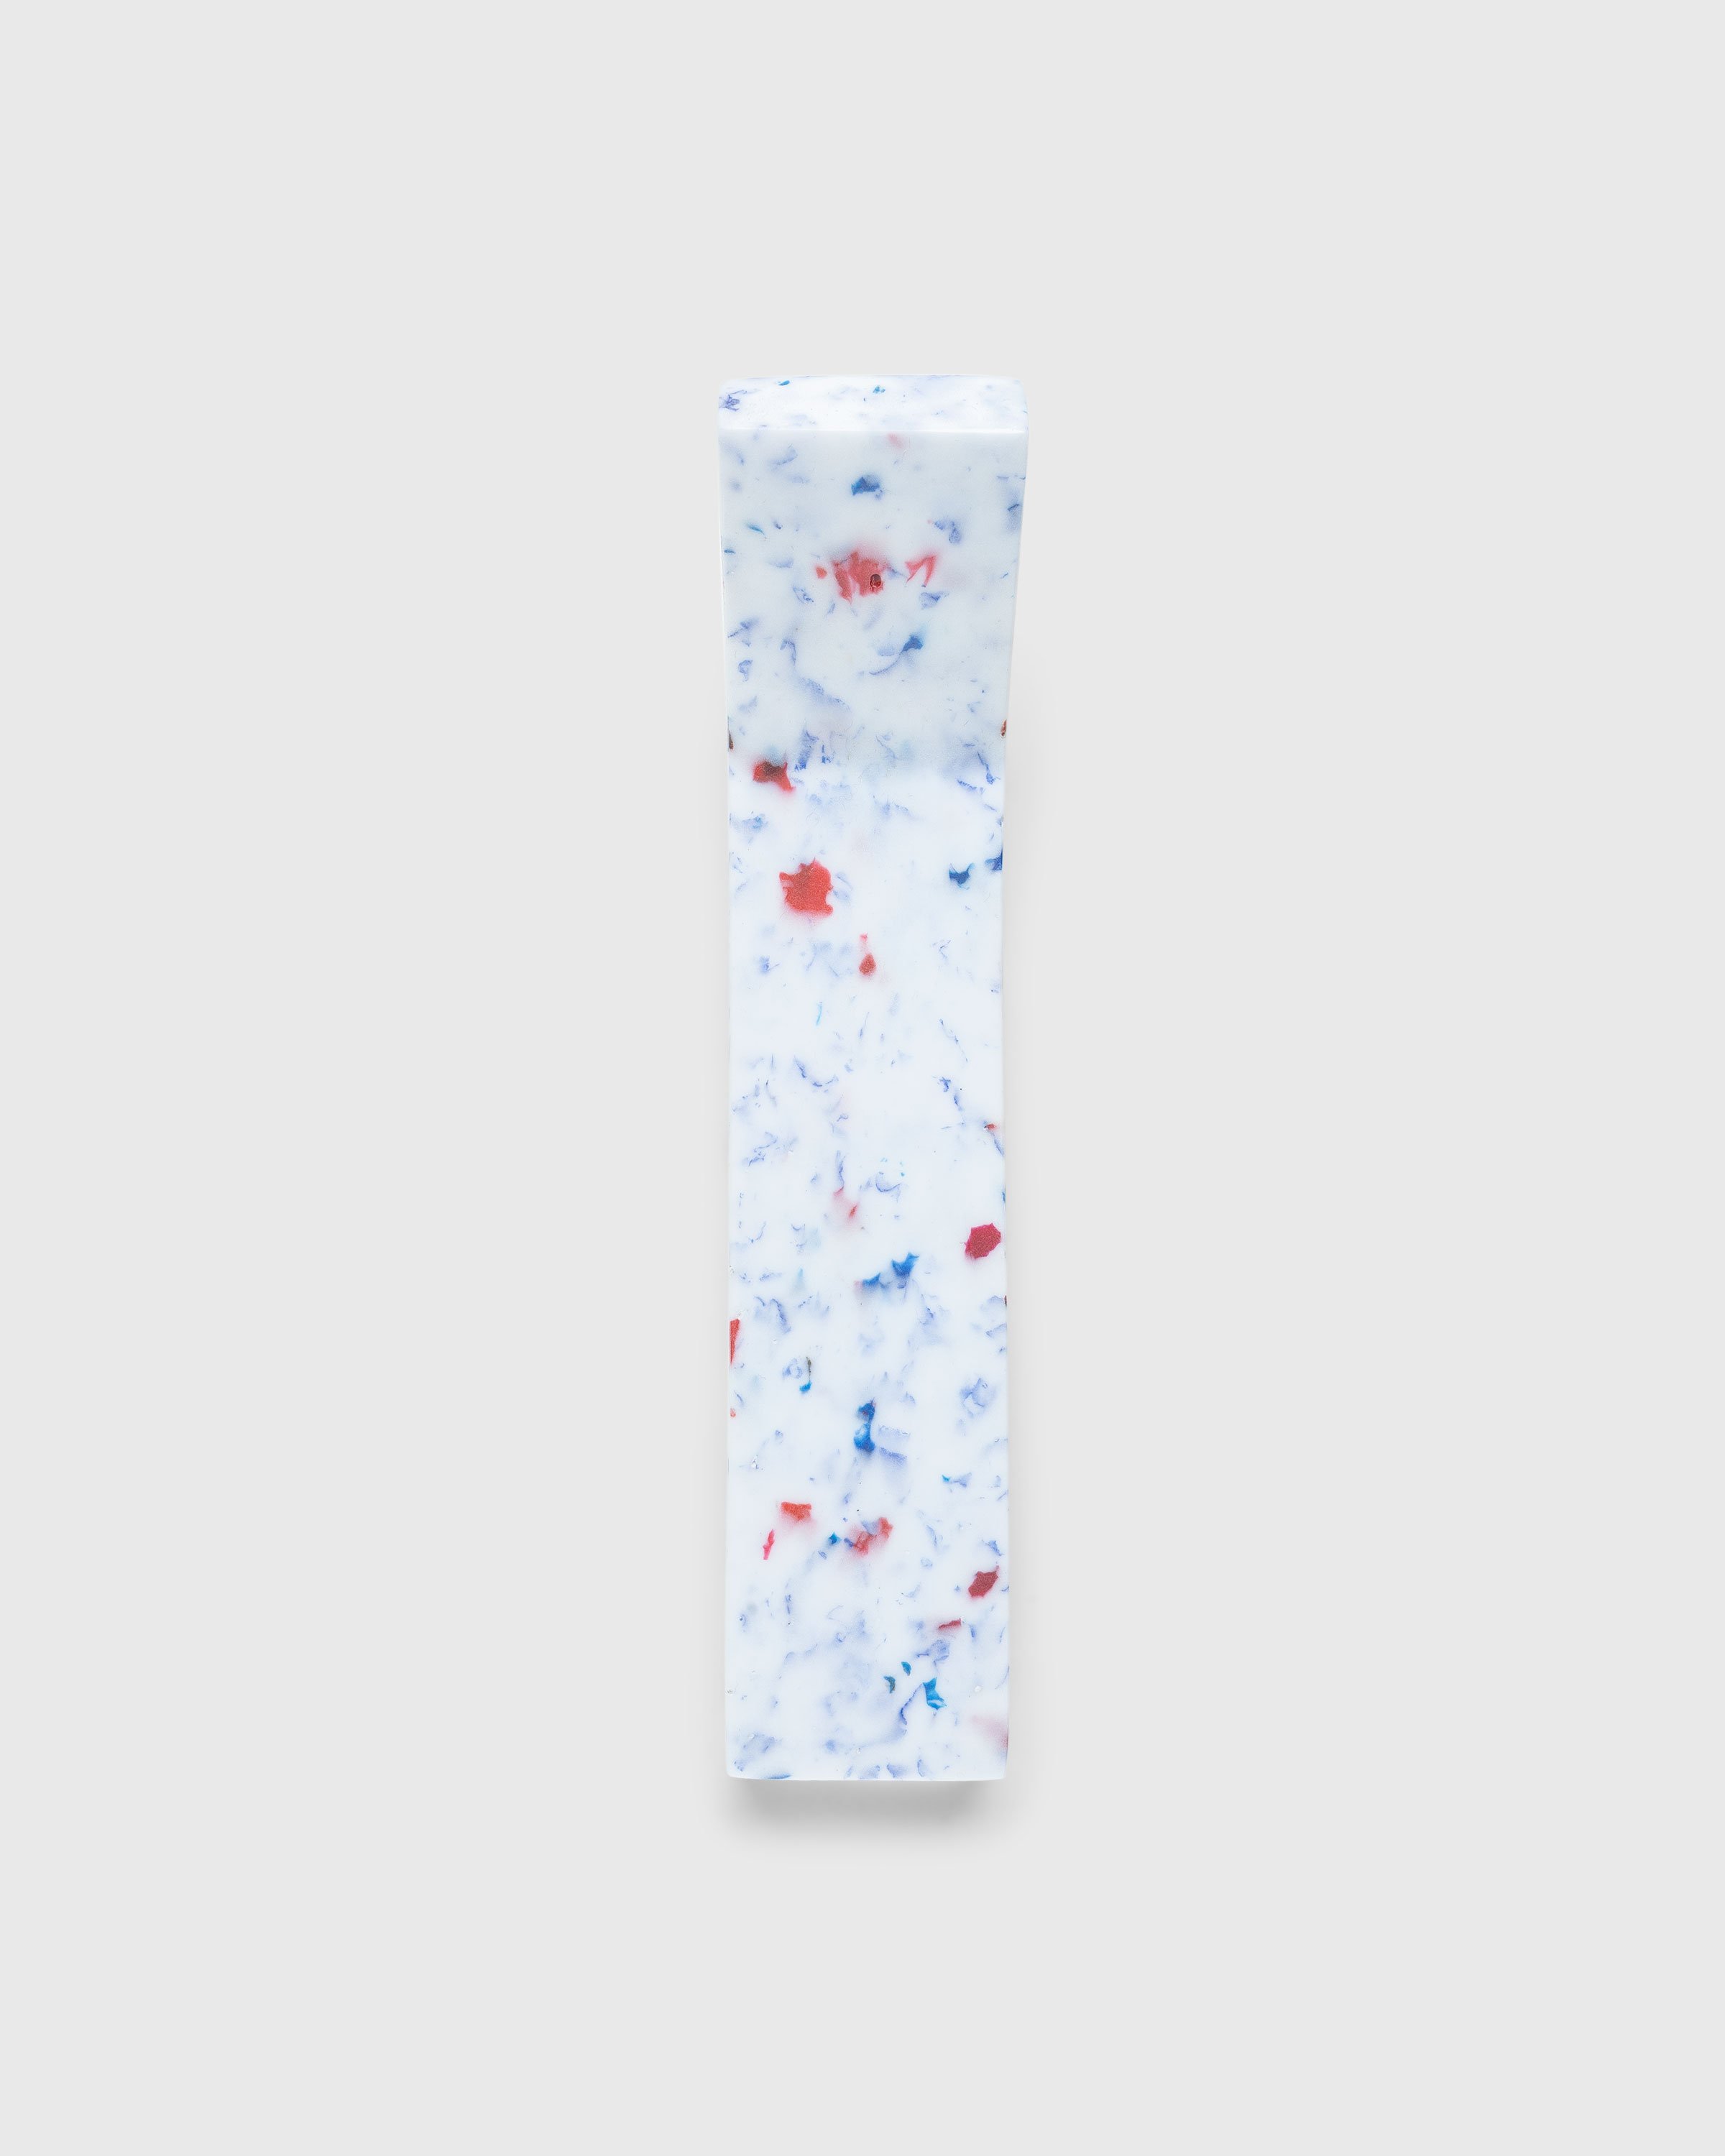 Space Available Studio - Incense Sculpture White - Lifestyle - White - Image 1